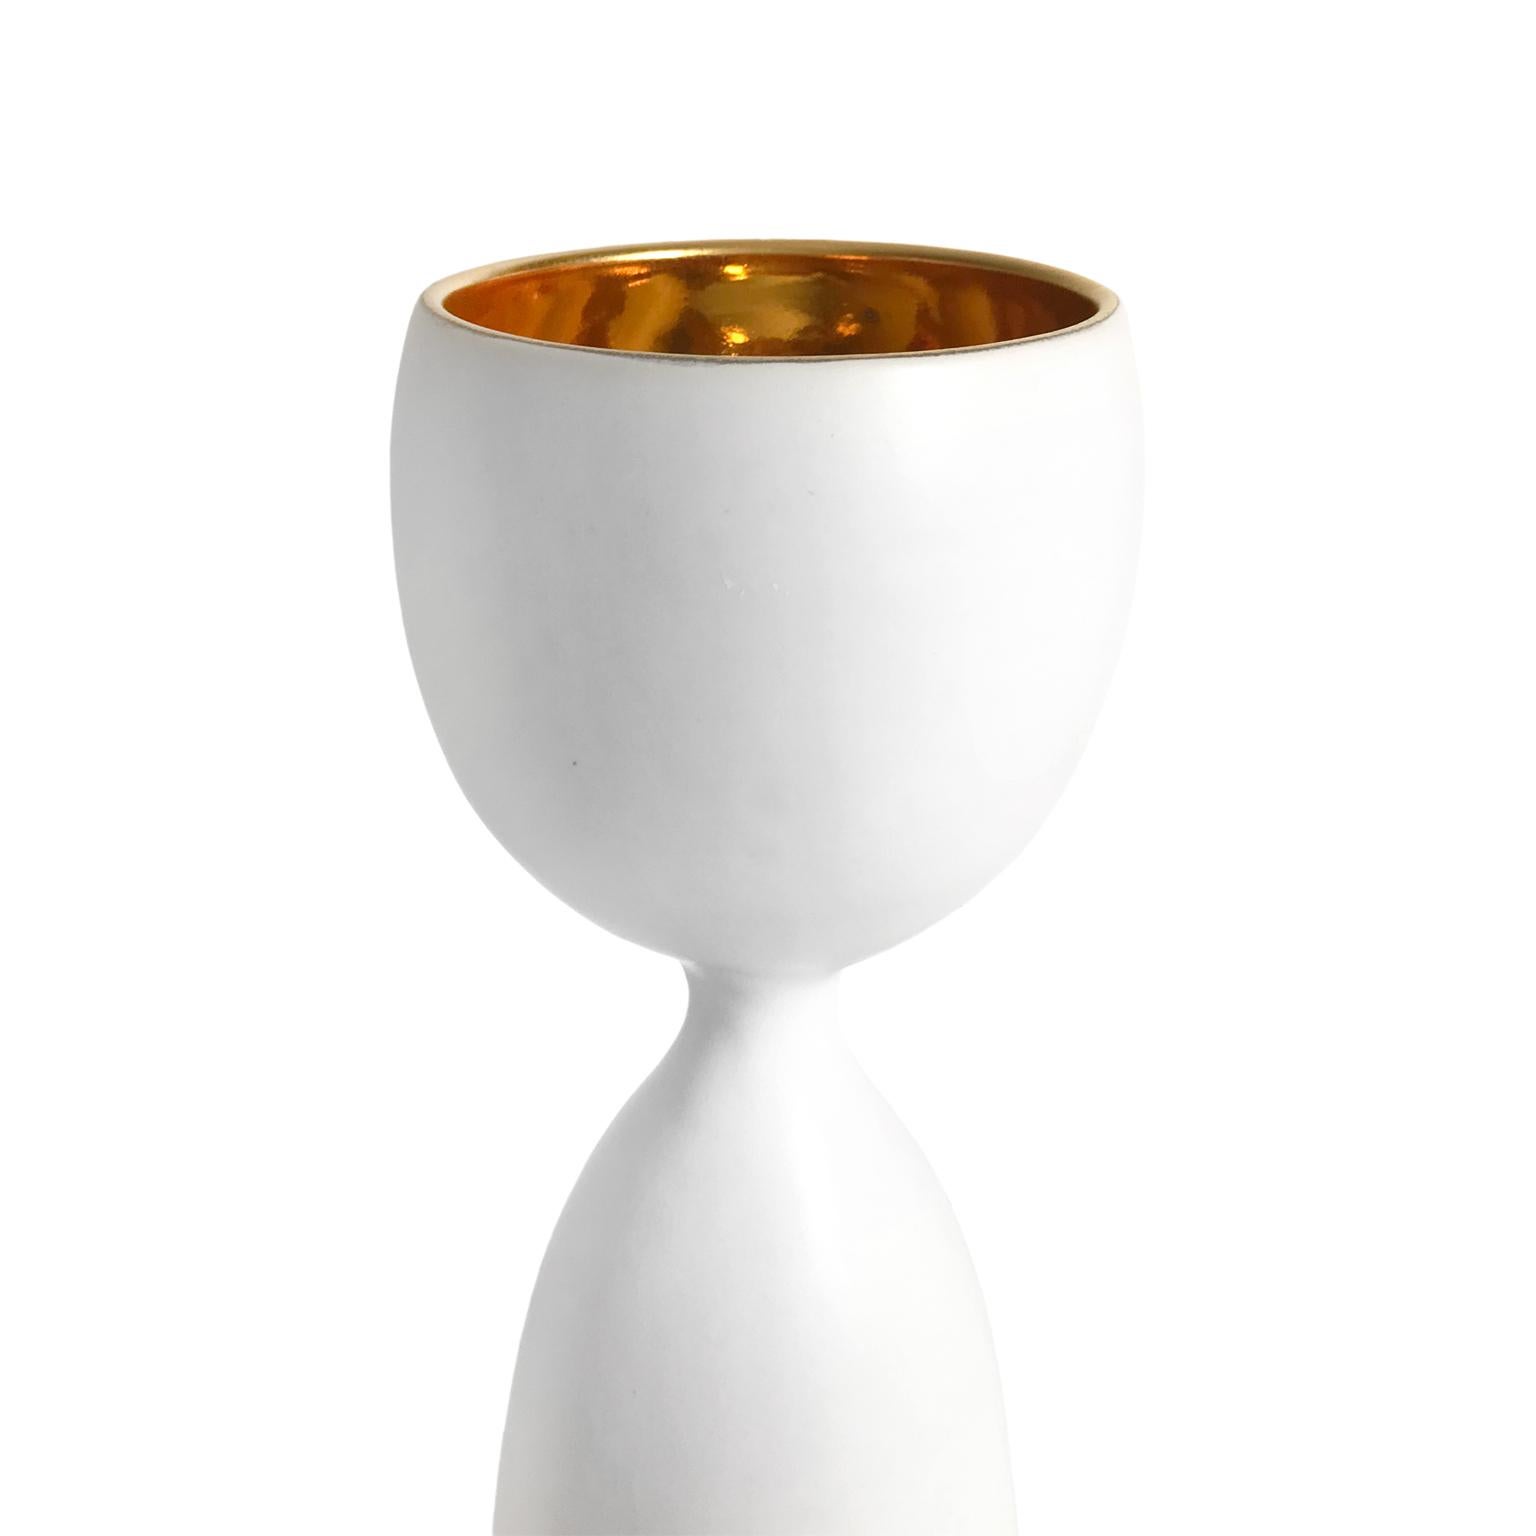 Alabaster glaze ceramic chalice #2 with 22-karat gold lustre interior by Sandi Fellman, 2018. 

Veteran photographer Sandi Fellman's ceramic vessels are an exploration of a new medium. The forms, palettes, and sensuality of her photos can be found